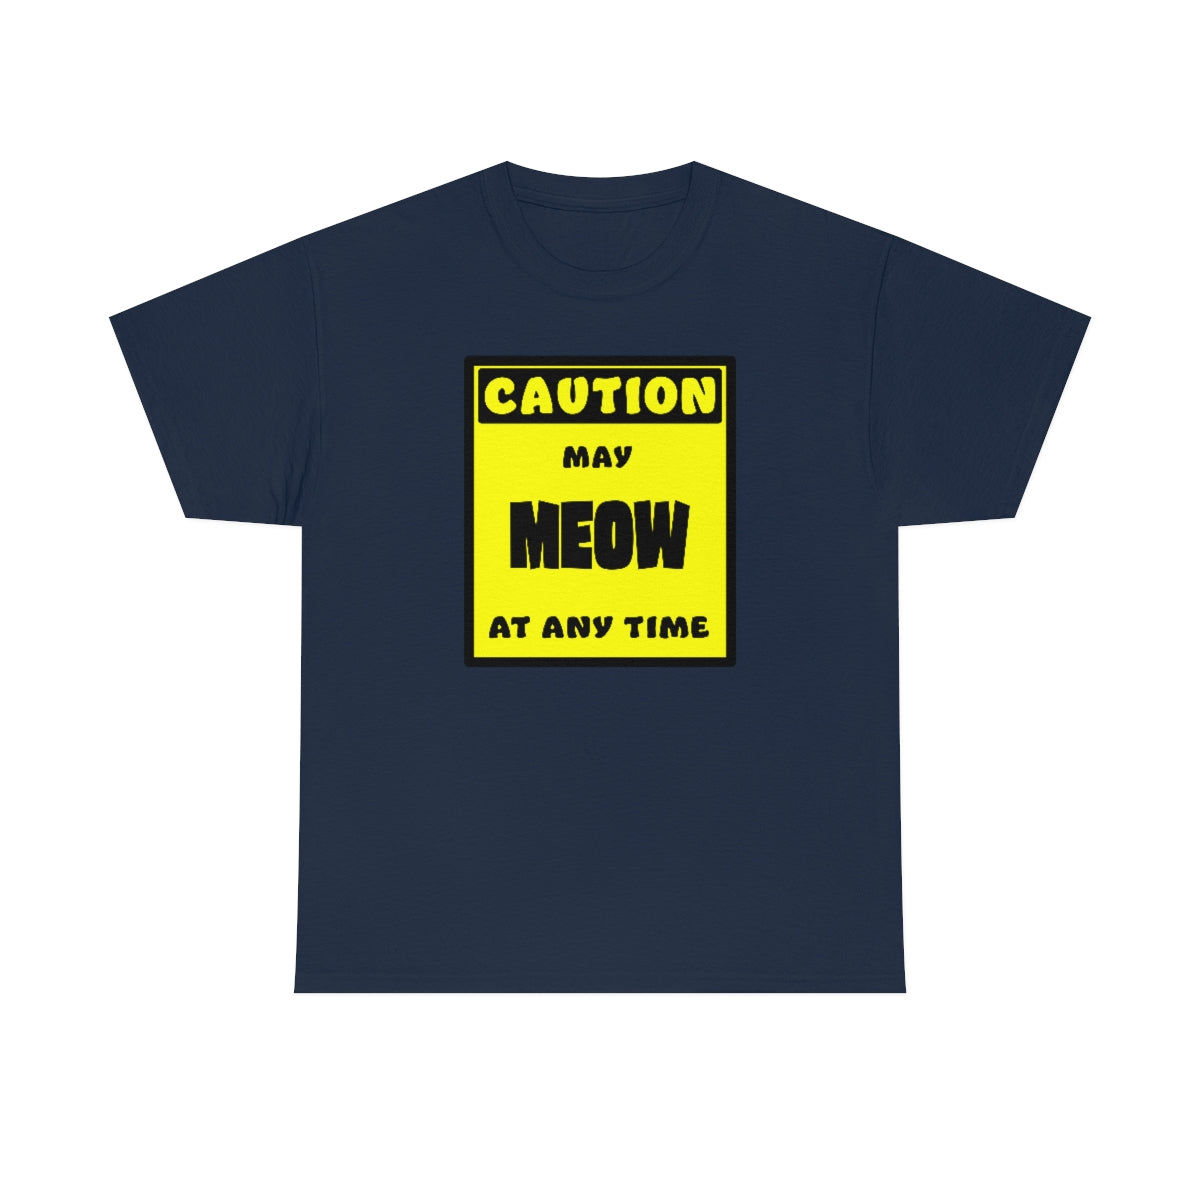 CAUTION! May MEOW at any time! - T-Shirt T-Shirt AFLT-Whootorca Navy Blue S 